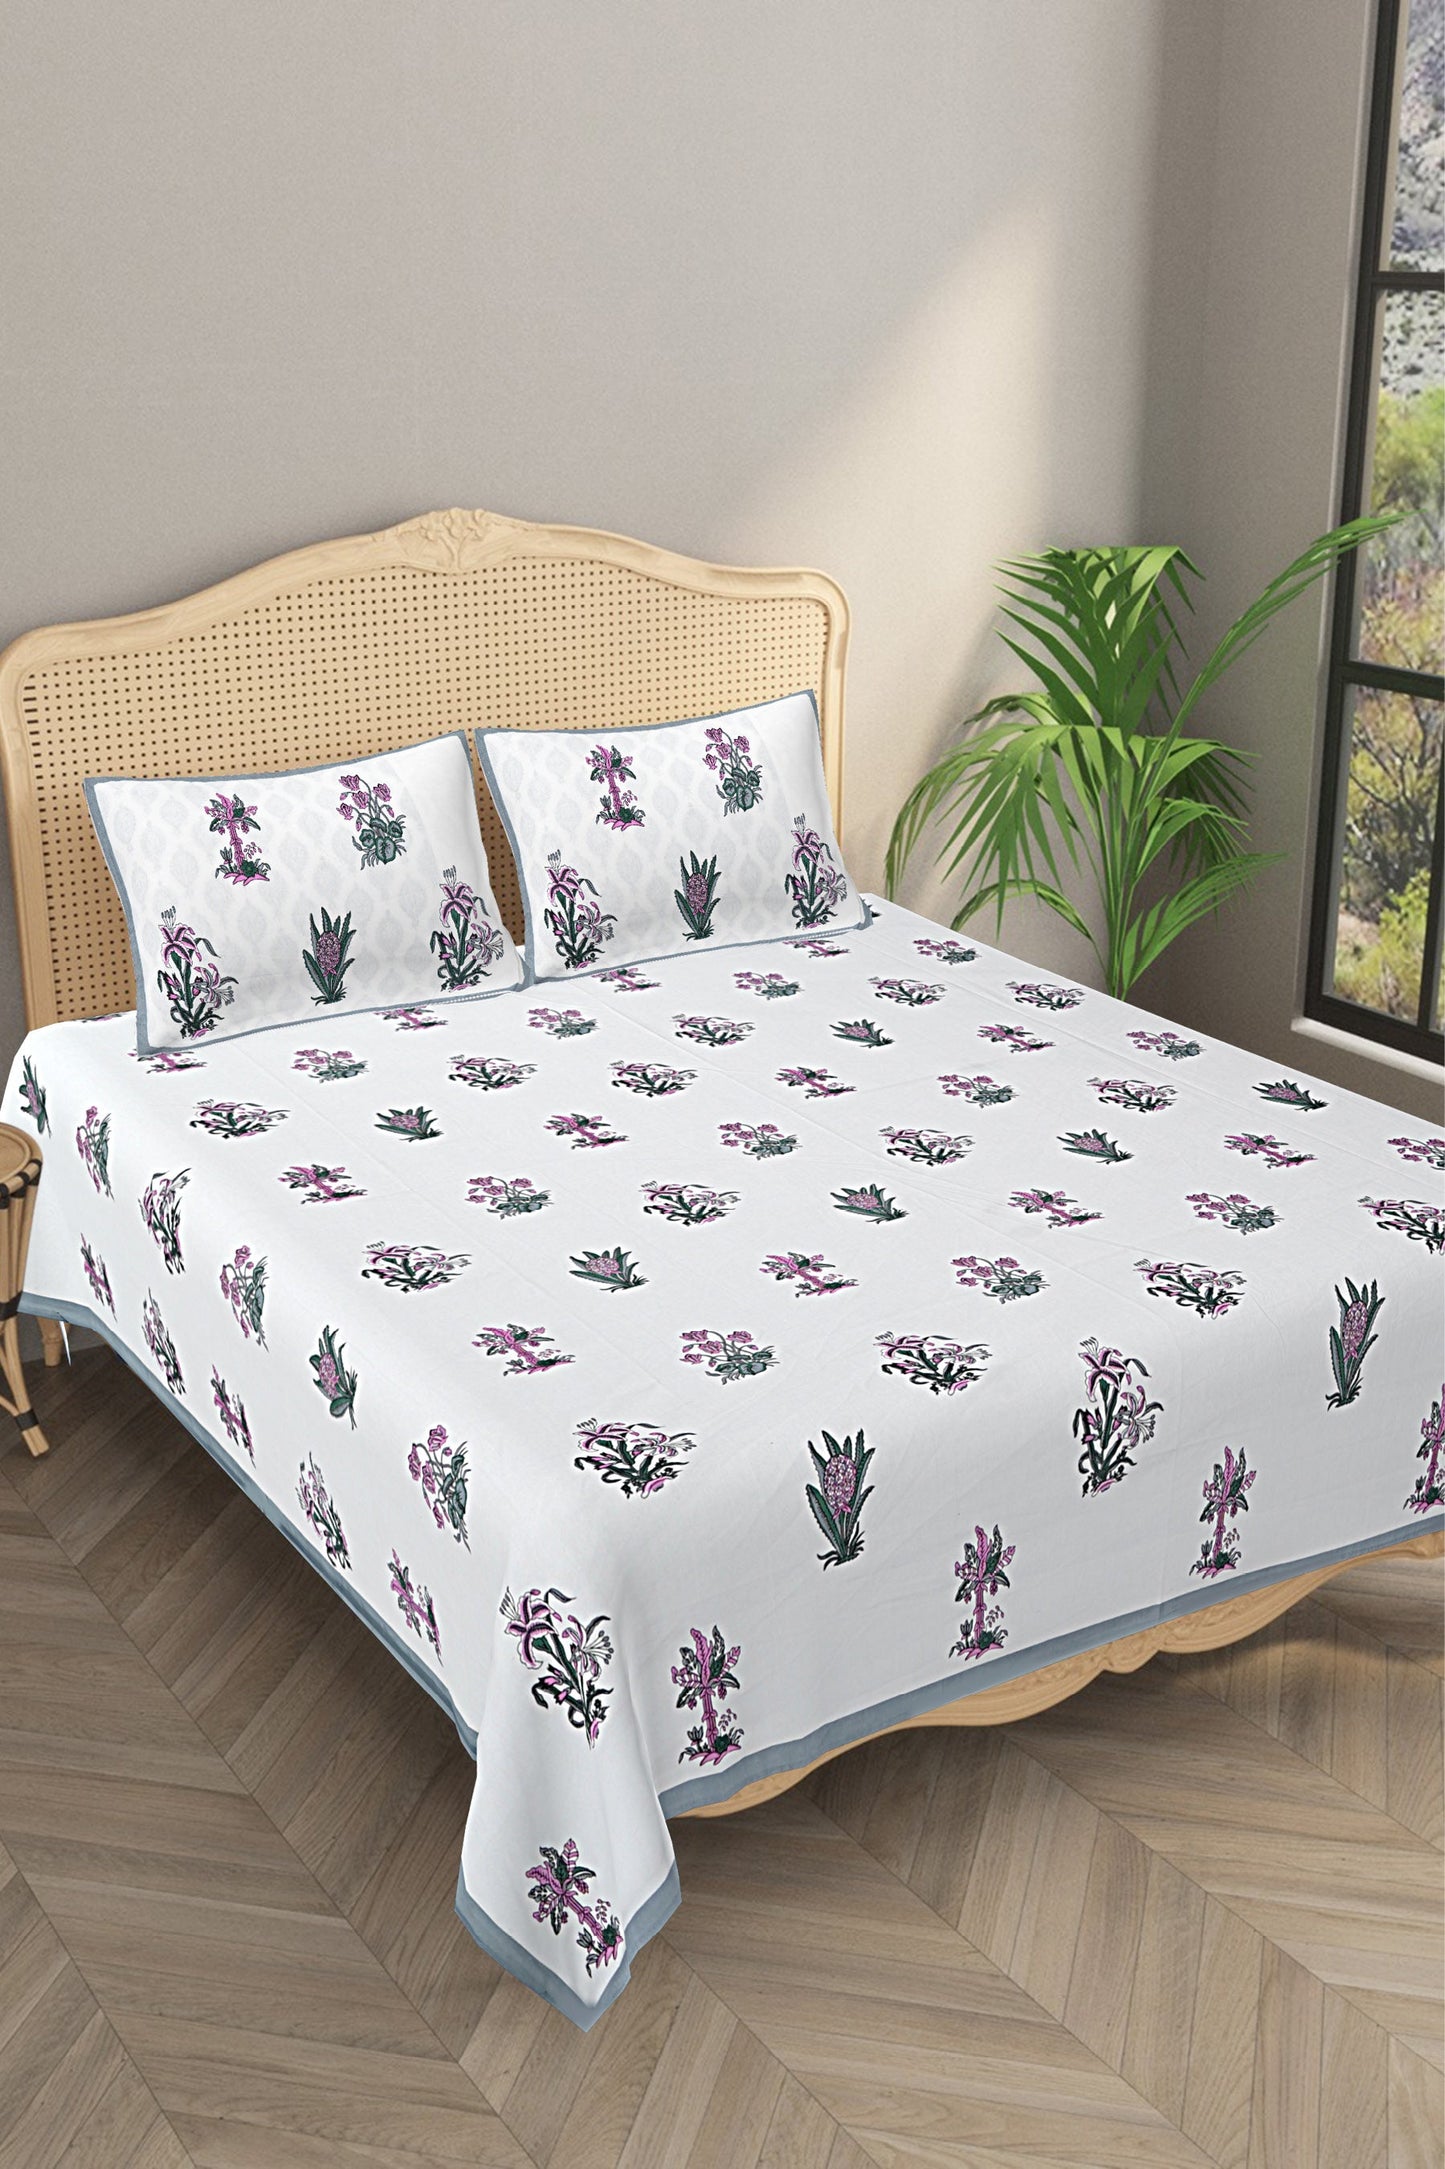 Ethnic Motifs - Designs from Mughal Gardens - Handcrafted Double Bed Sheet with 2 Pillow Covers - Buta Grey